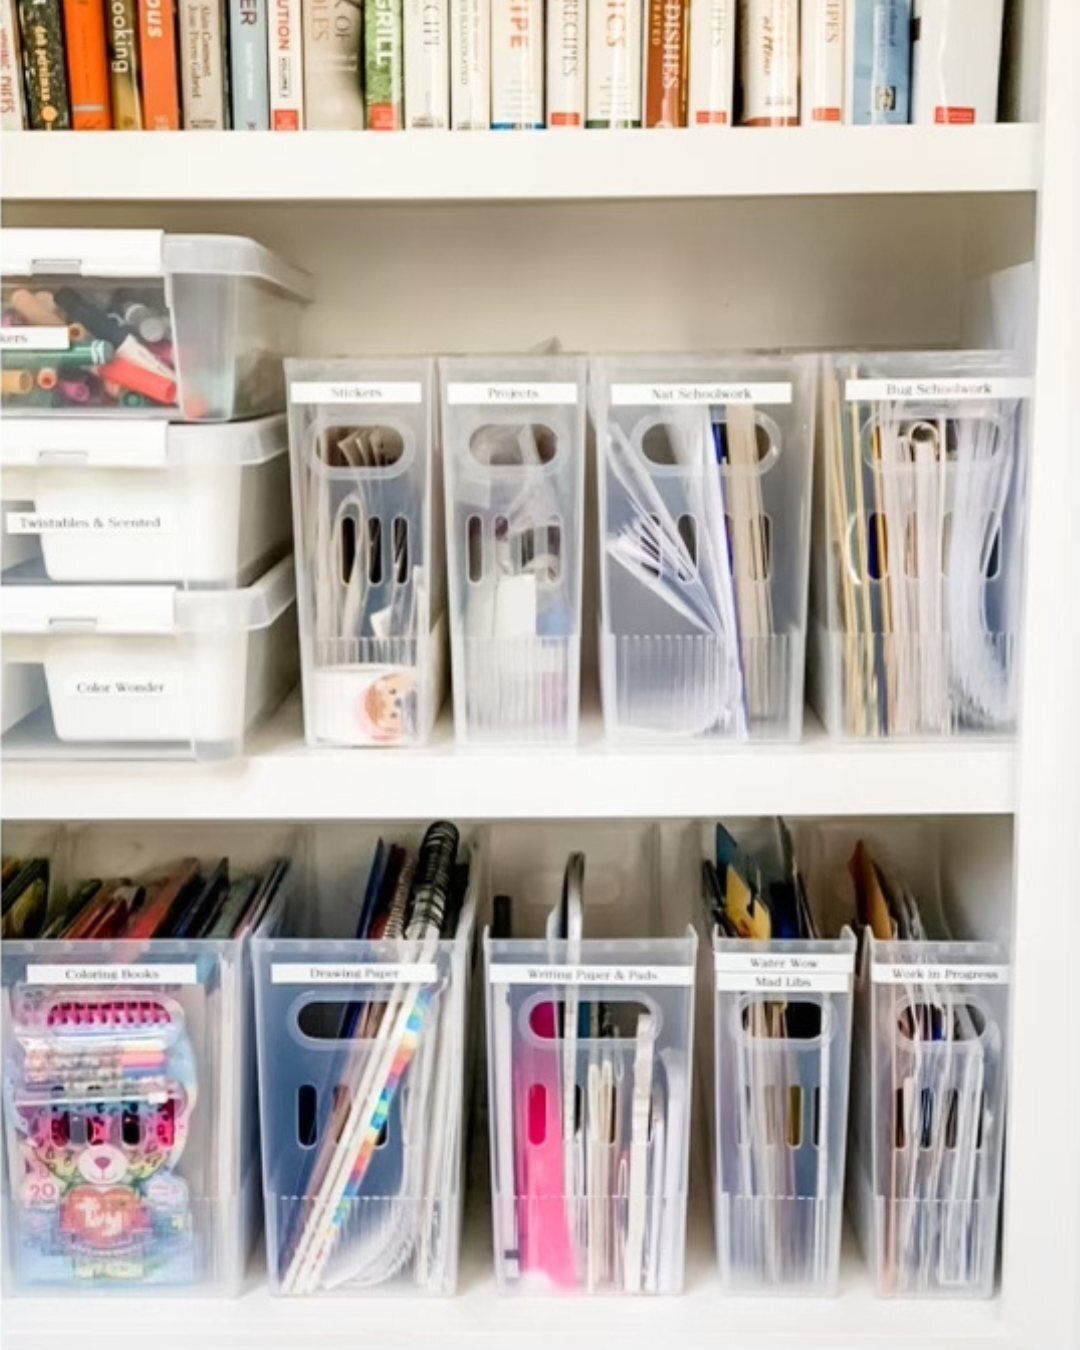 Arts &amp; crafts, office and school supplies.. How do you keep them organized? 🤯

Well&hellip; We&rsquo;ve said it once and we&rsquo;ll say it again, BINS AND LABELS! In this space we categorized everything from markers, stickers, writing pads, dra